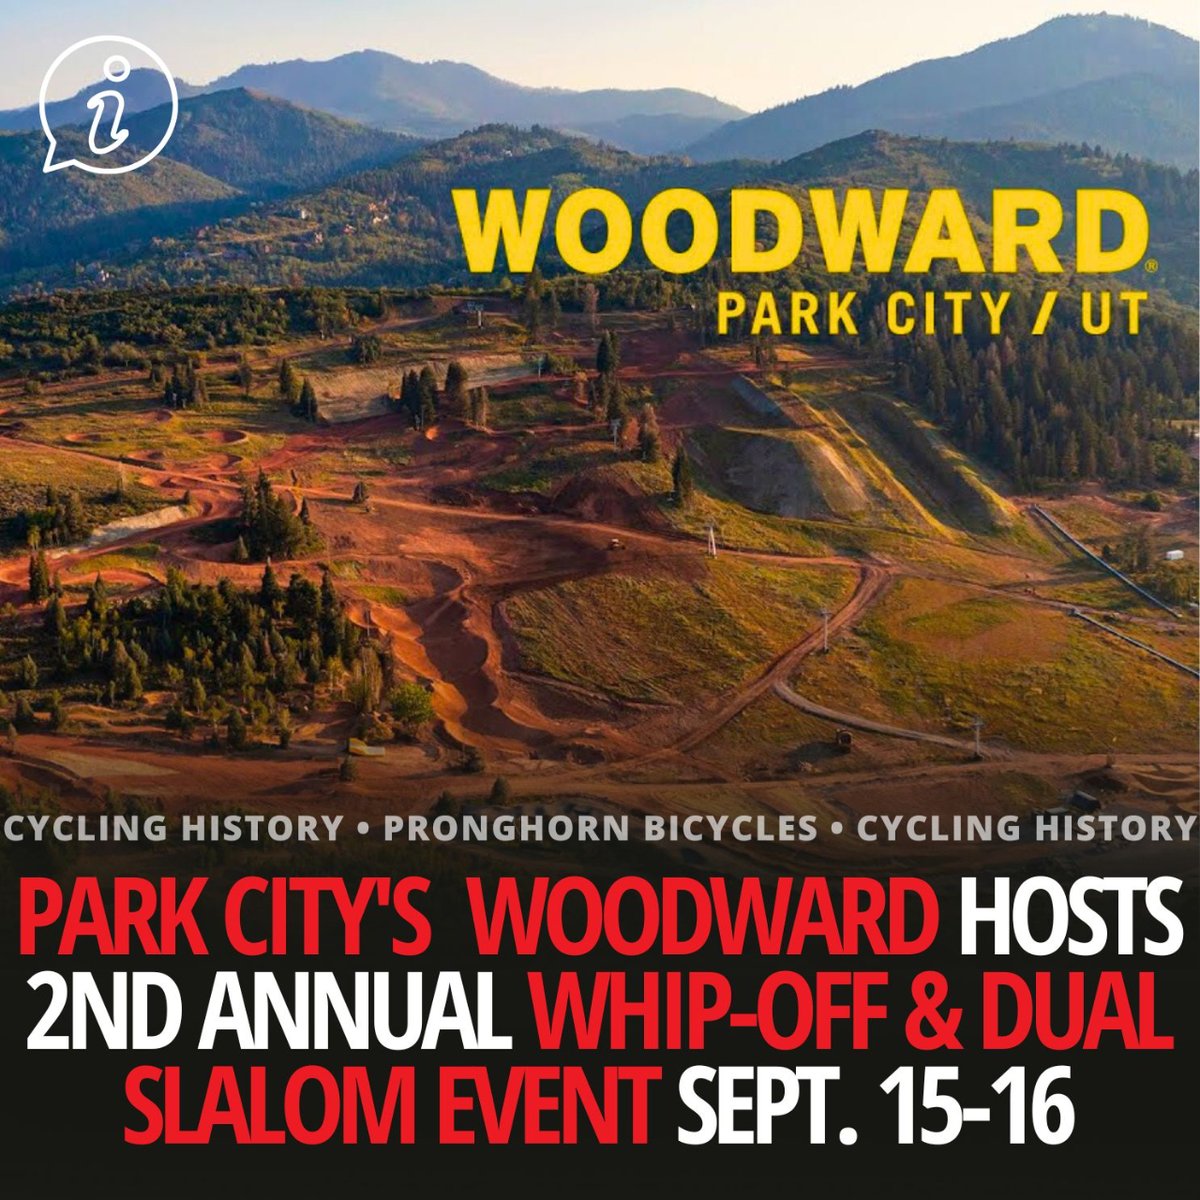 Someone just told me about woodward today... this park is insane!

As always, for any of your biking needs - we’ve got you covered. Just give us a call 🤙

(435) 230-3775

#utah #ut #slc #ogden #bikepark #loganutah
#mtbguide #mtbusa #GodBless
#mountainbiking #bikelife